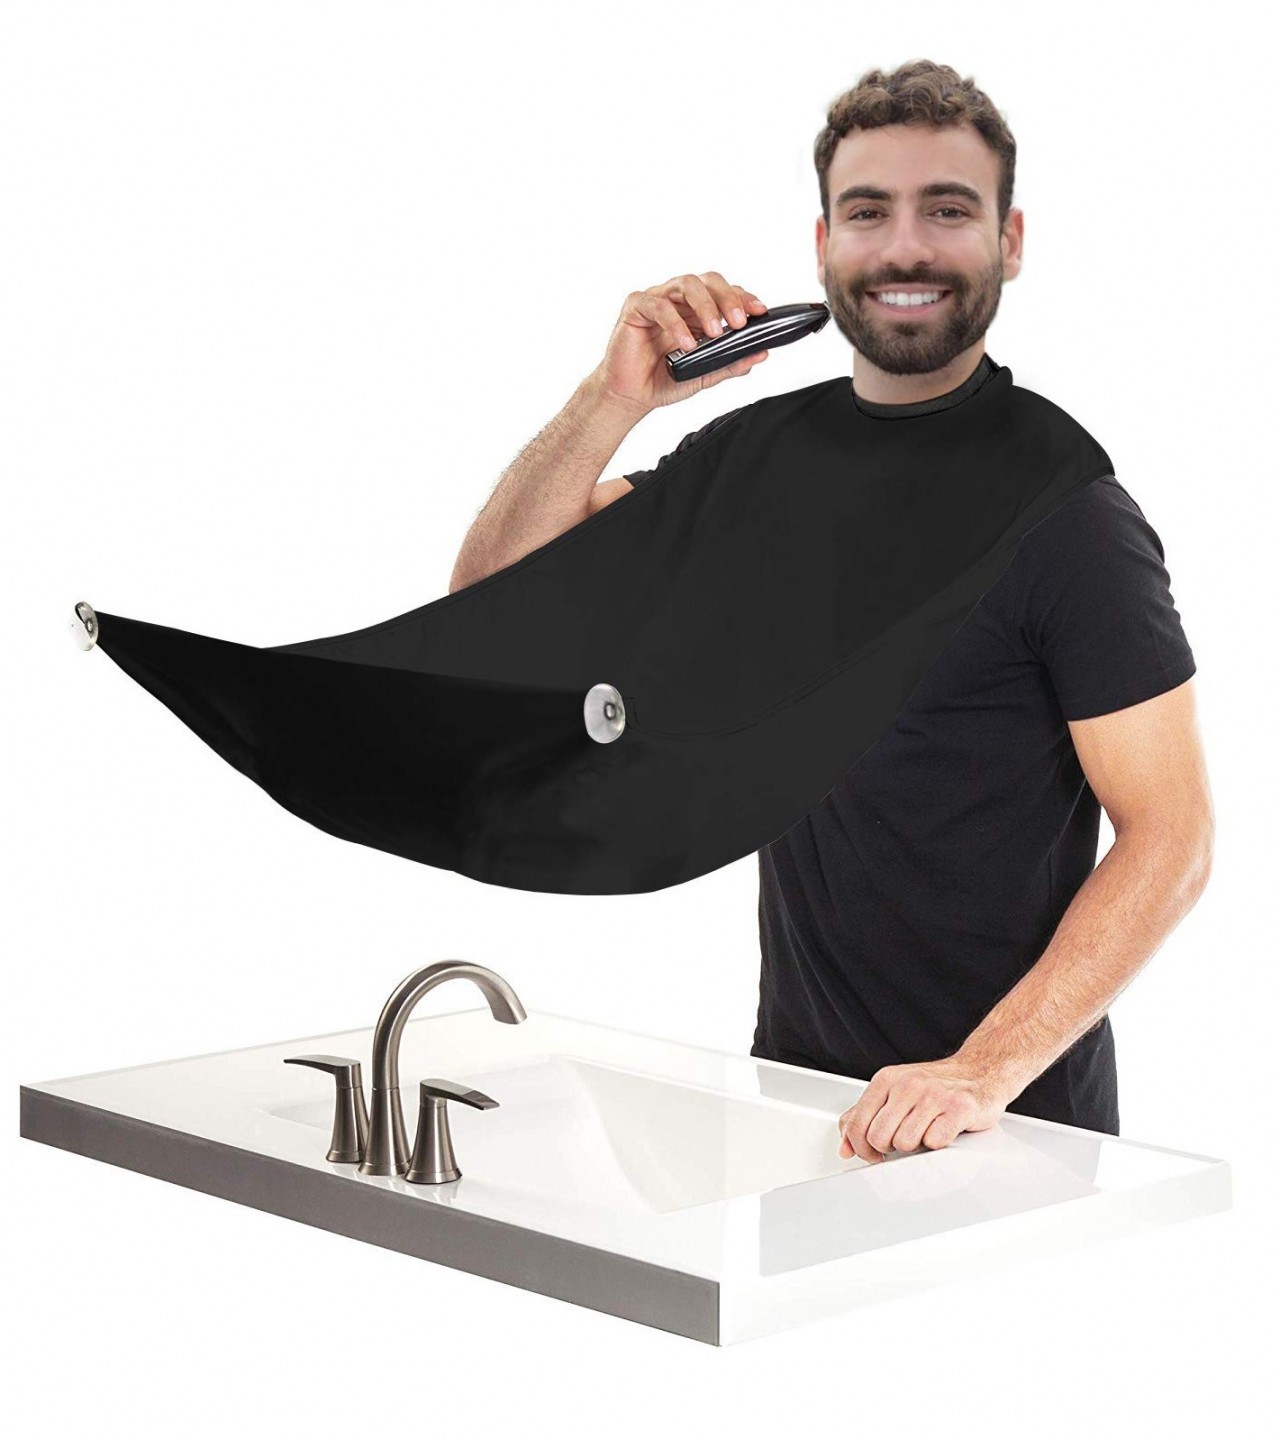 Beard Bib Cape for Shaving Apron & Hair Clippings Catcher with Suction Cup Mirror Salon